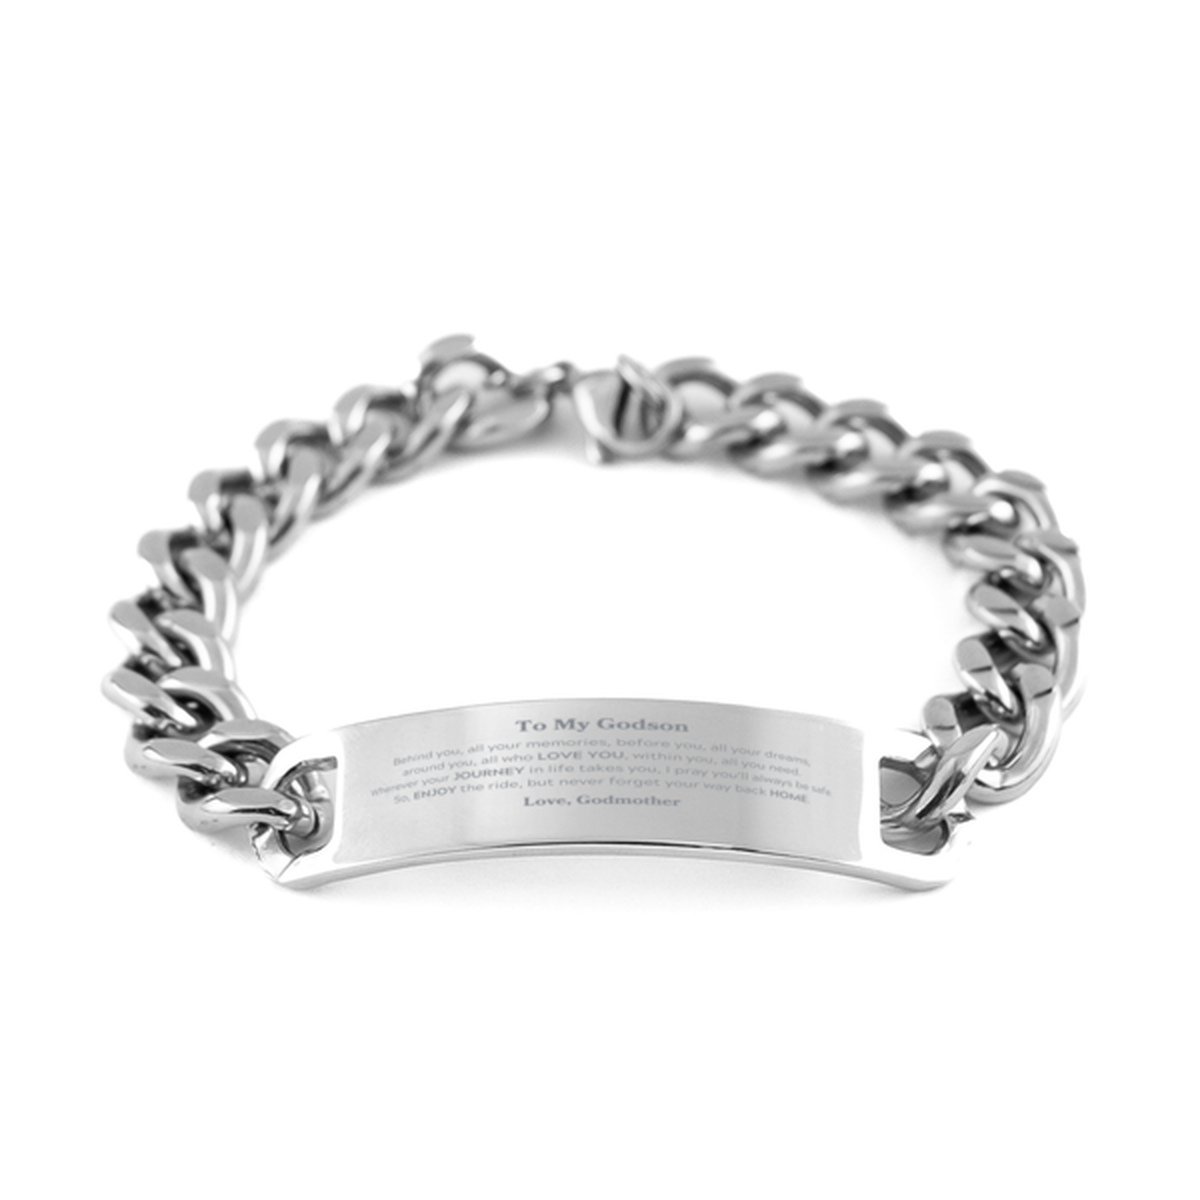 To My Godson Graduation Gifts from Godmother, Godson Cuban Chain Stainless Steel Bracelet Christmas Birthday Gifts for Godson Behind you, all your memories, before you, all your dreams. Love, Godmother